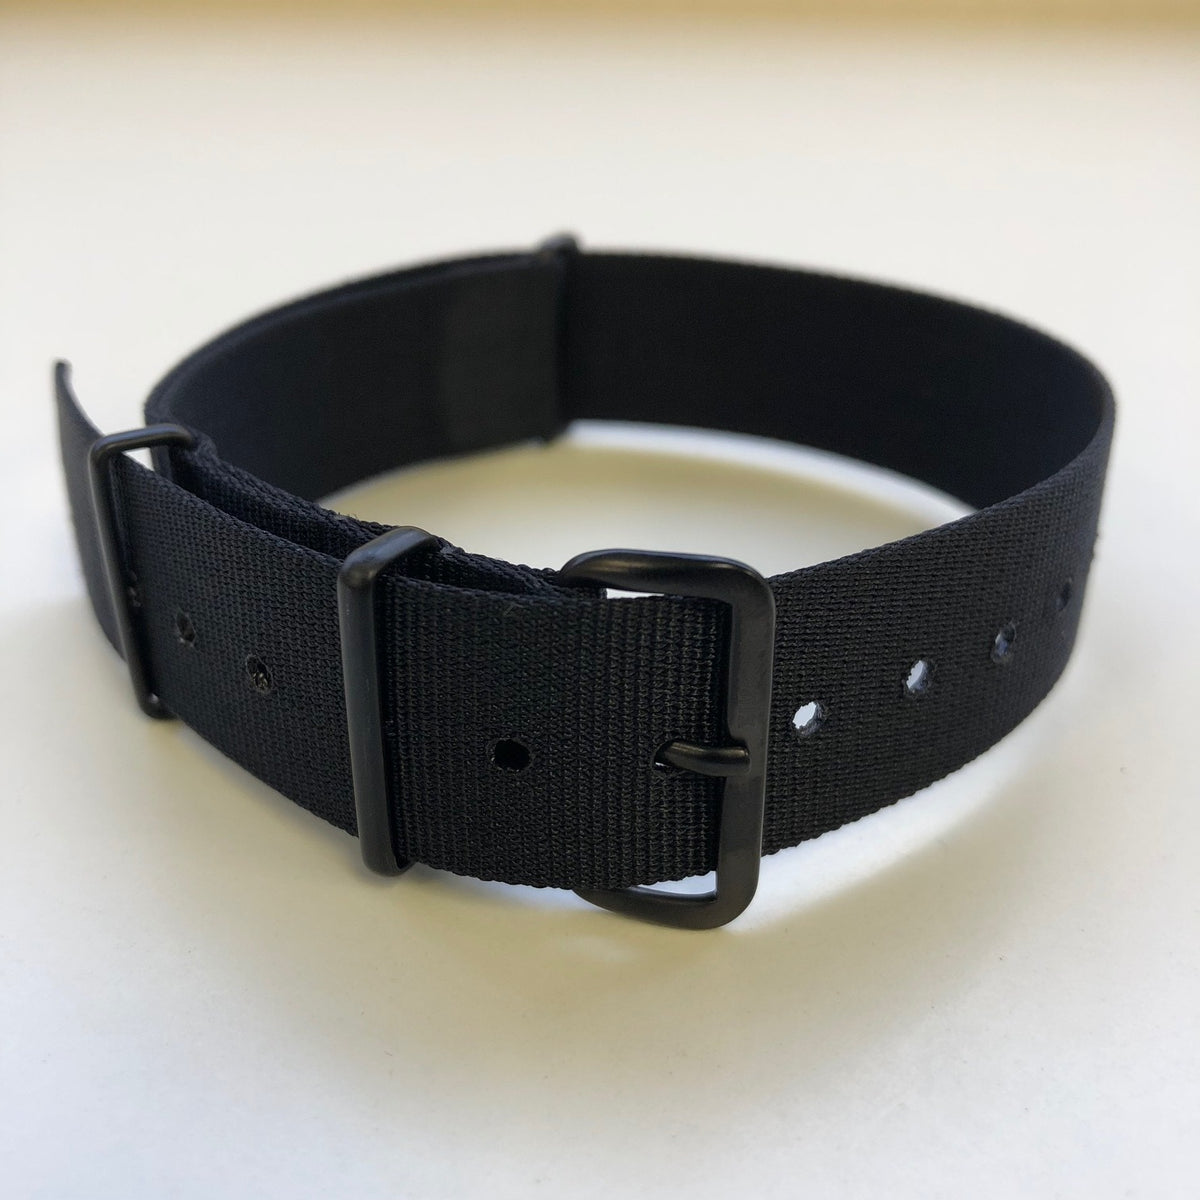 NATO STRAP -Blacked out by Phoenix